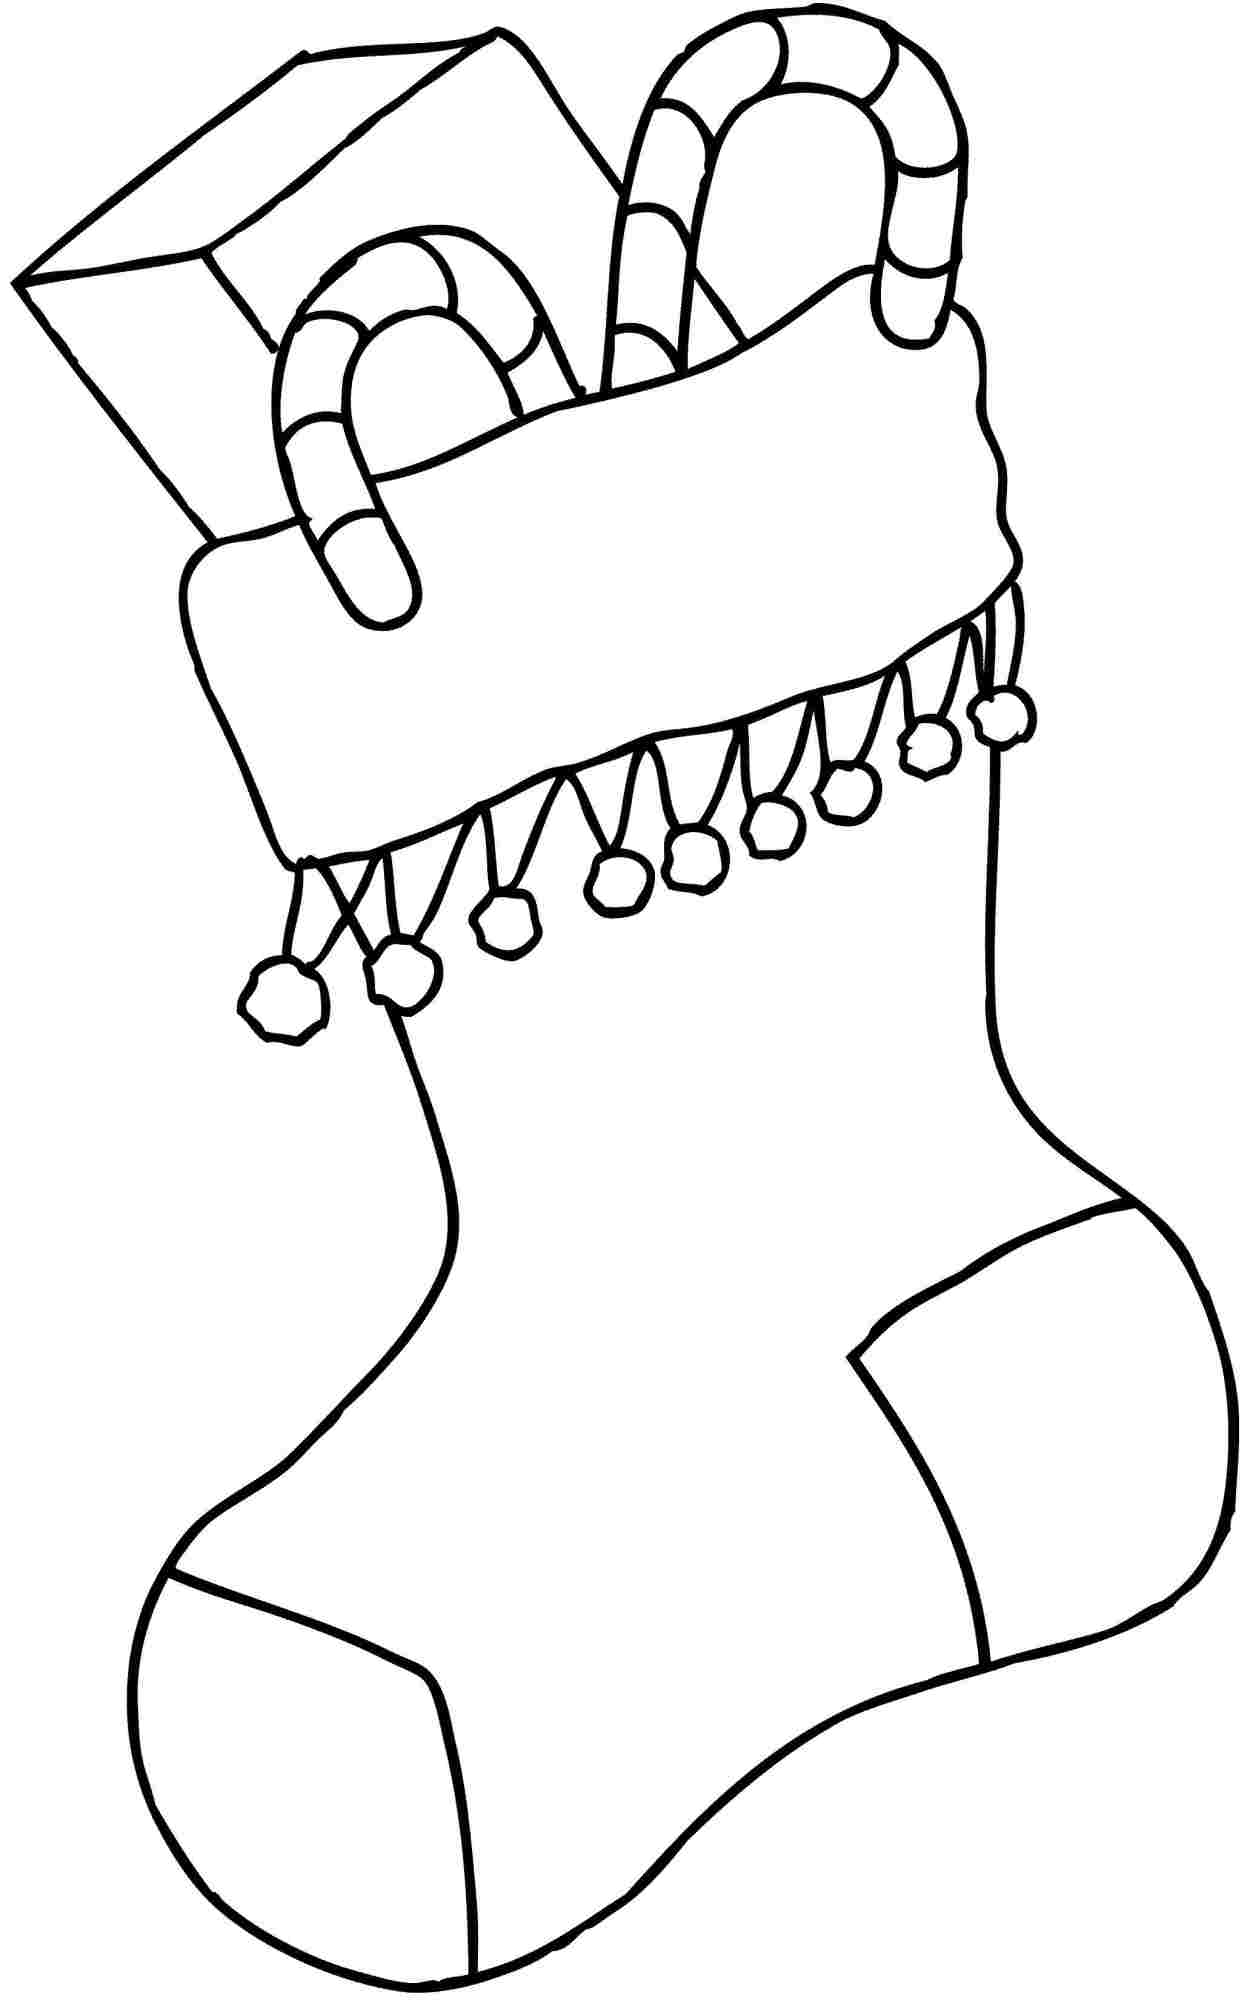 Christmas Stocking Coloring Pages Best Coloring Pages For Kids